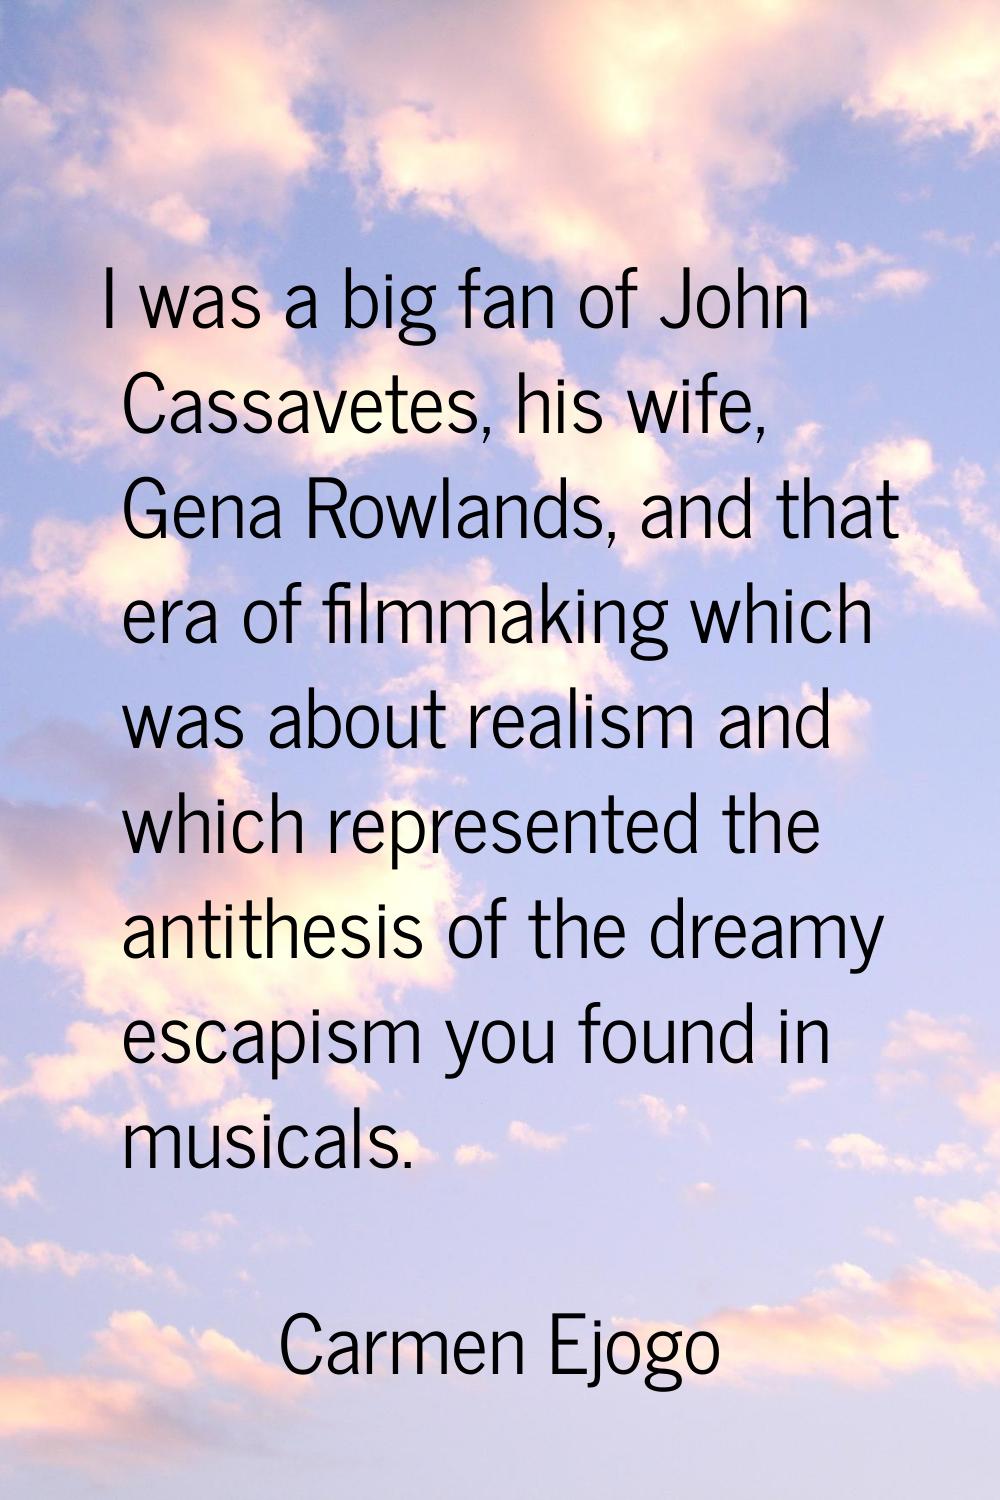 I was a big fan of John Cassavetes, his wife, Gena Rowlands, and that era of filmmaking which was a